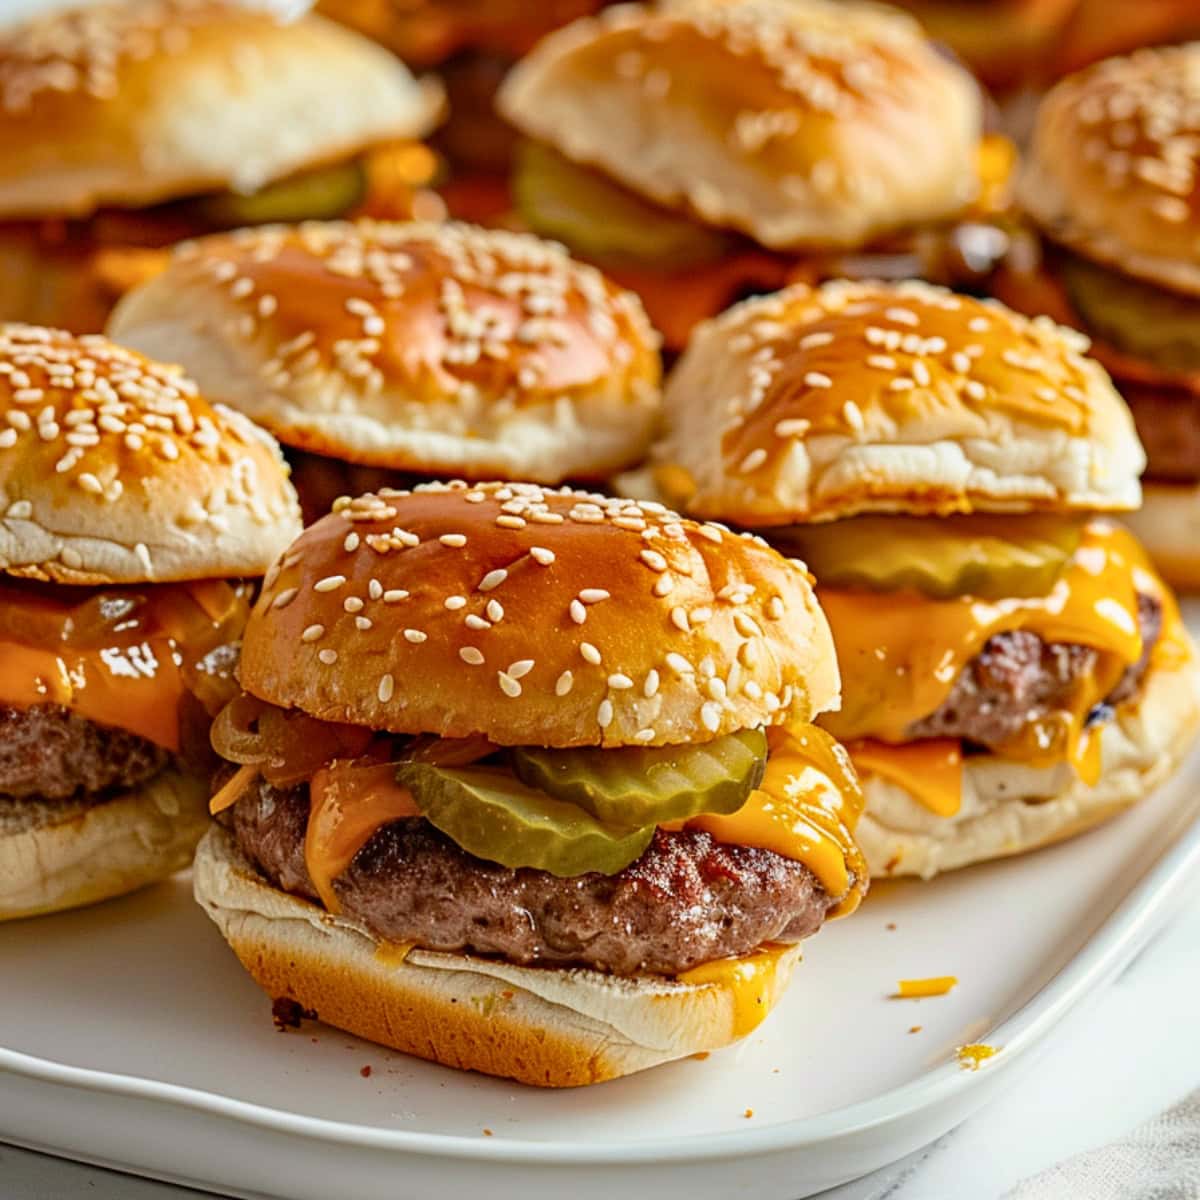 Cheeseburgers sliders with melted cheddar cheese, beef patty and sliced pickles.